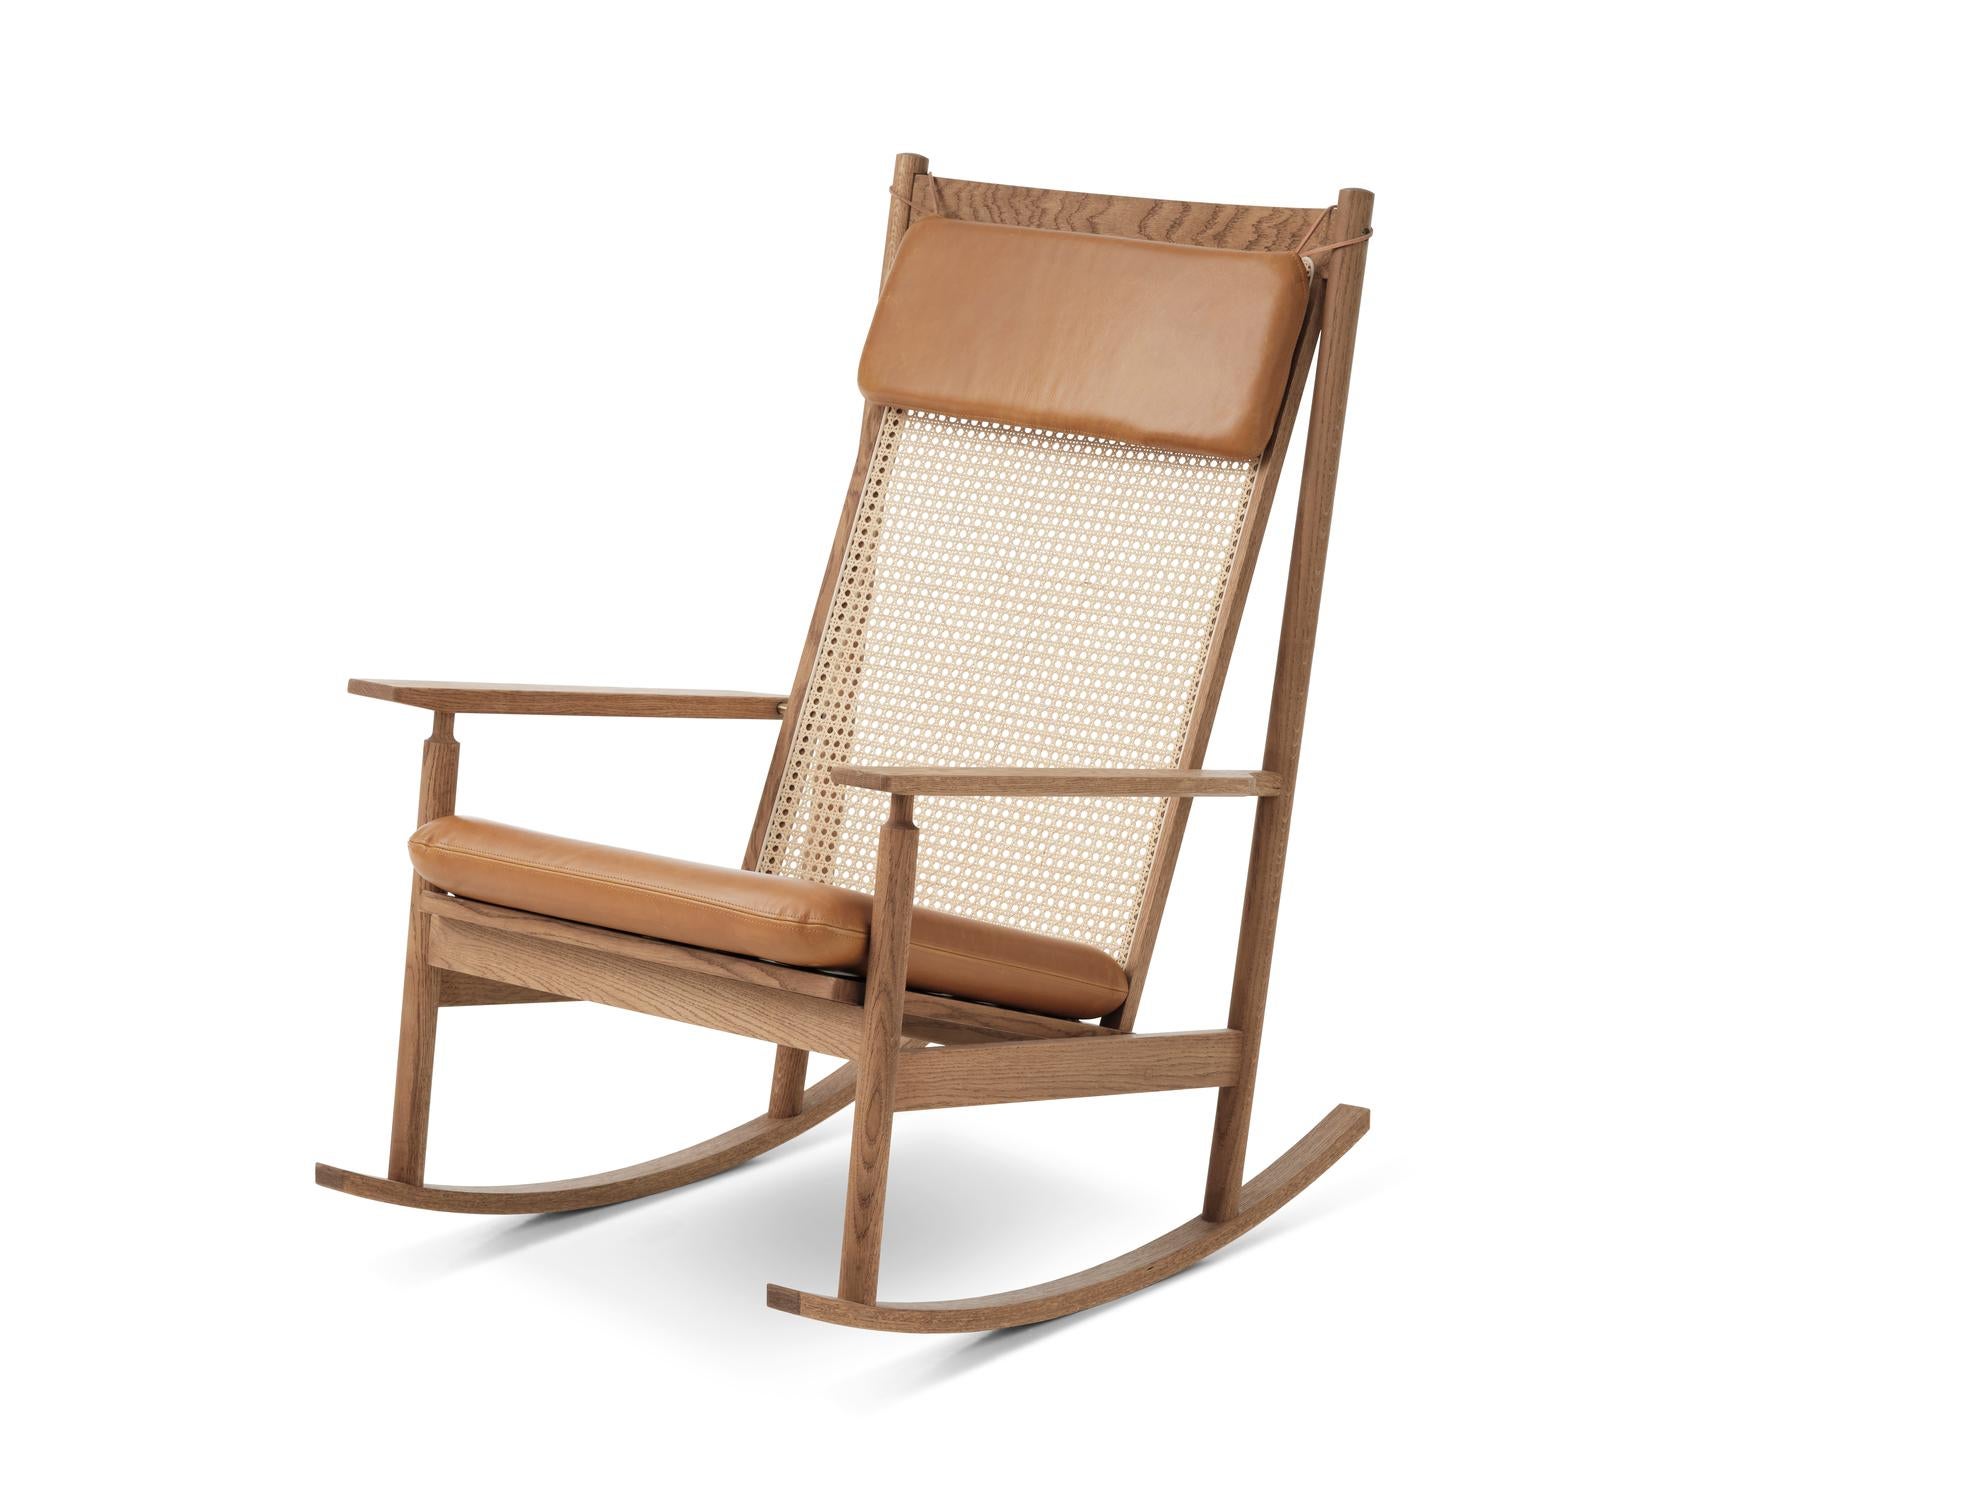 Swing Rocking Chair Vegetal Teak Nature by Warm Nordic
Dimensions: D91 x W68 x H 103 cm
Material: Wood, Foam, Rubber springs, French cane, Textile or leather upholstery, Teak, Vegetal
Weight: 16.5 kg
Also available in different colours,